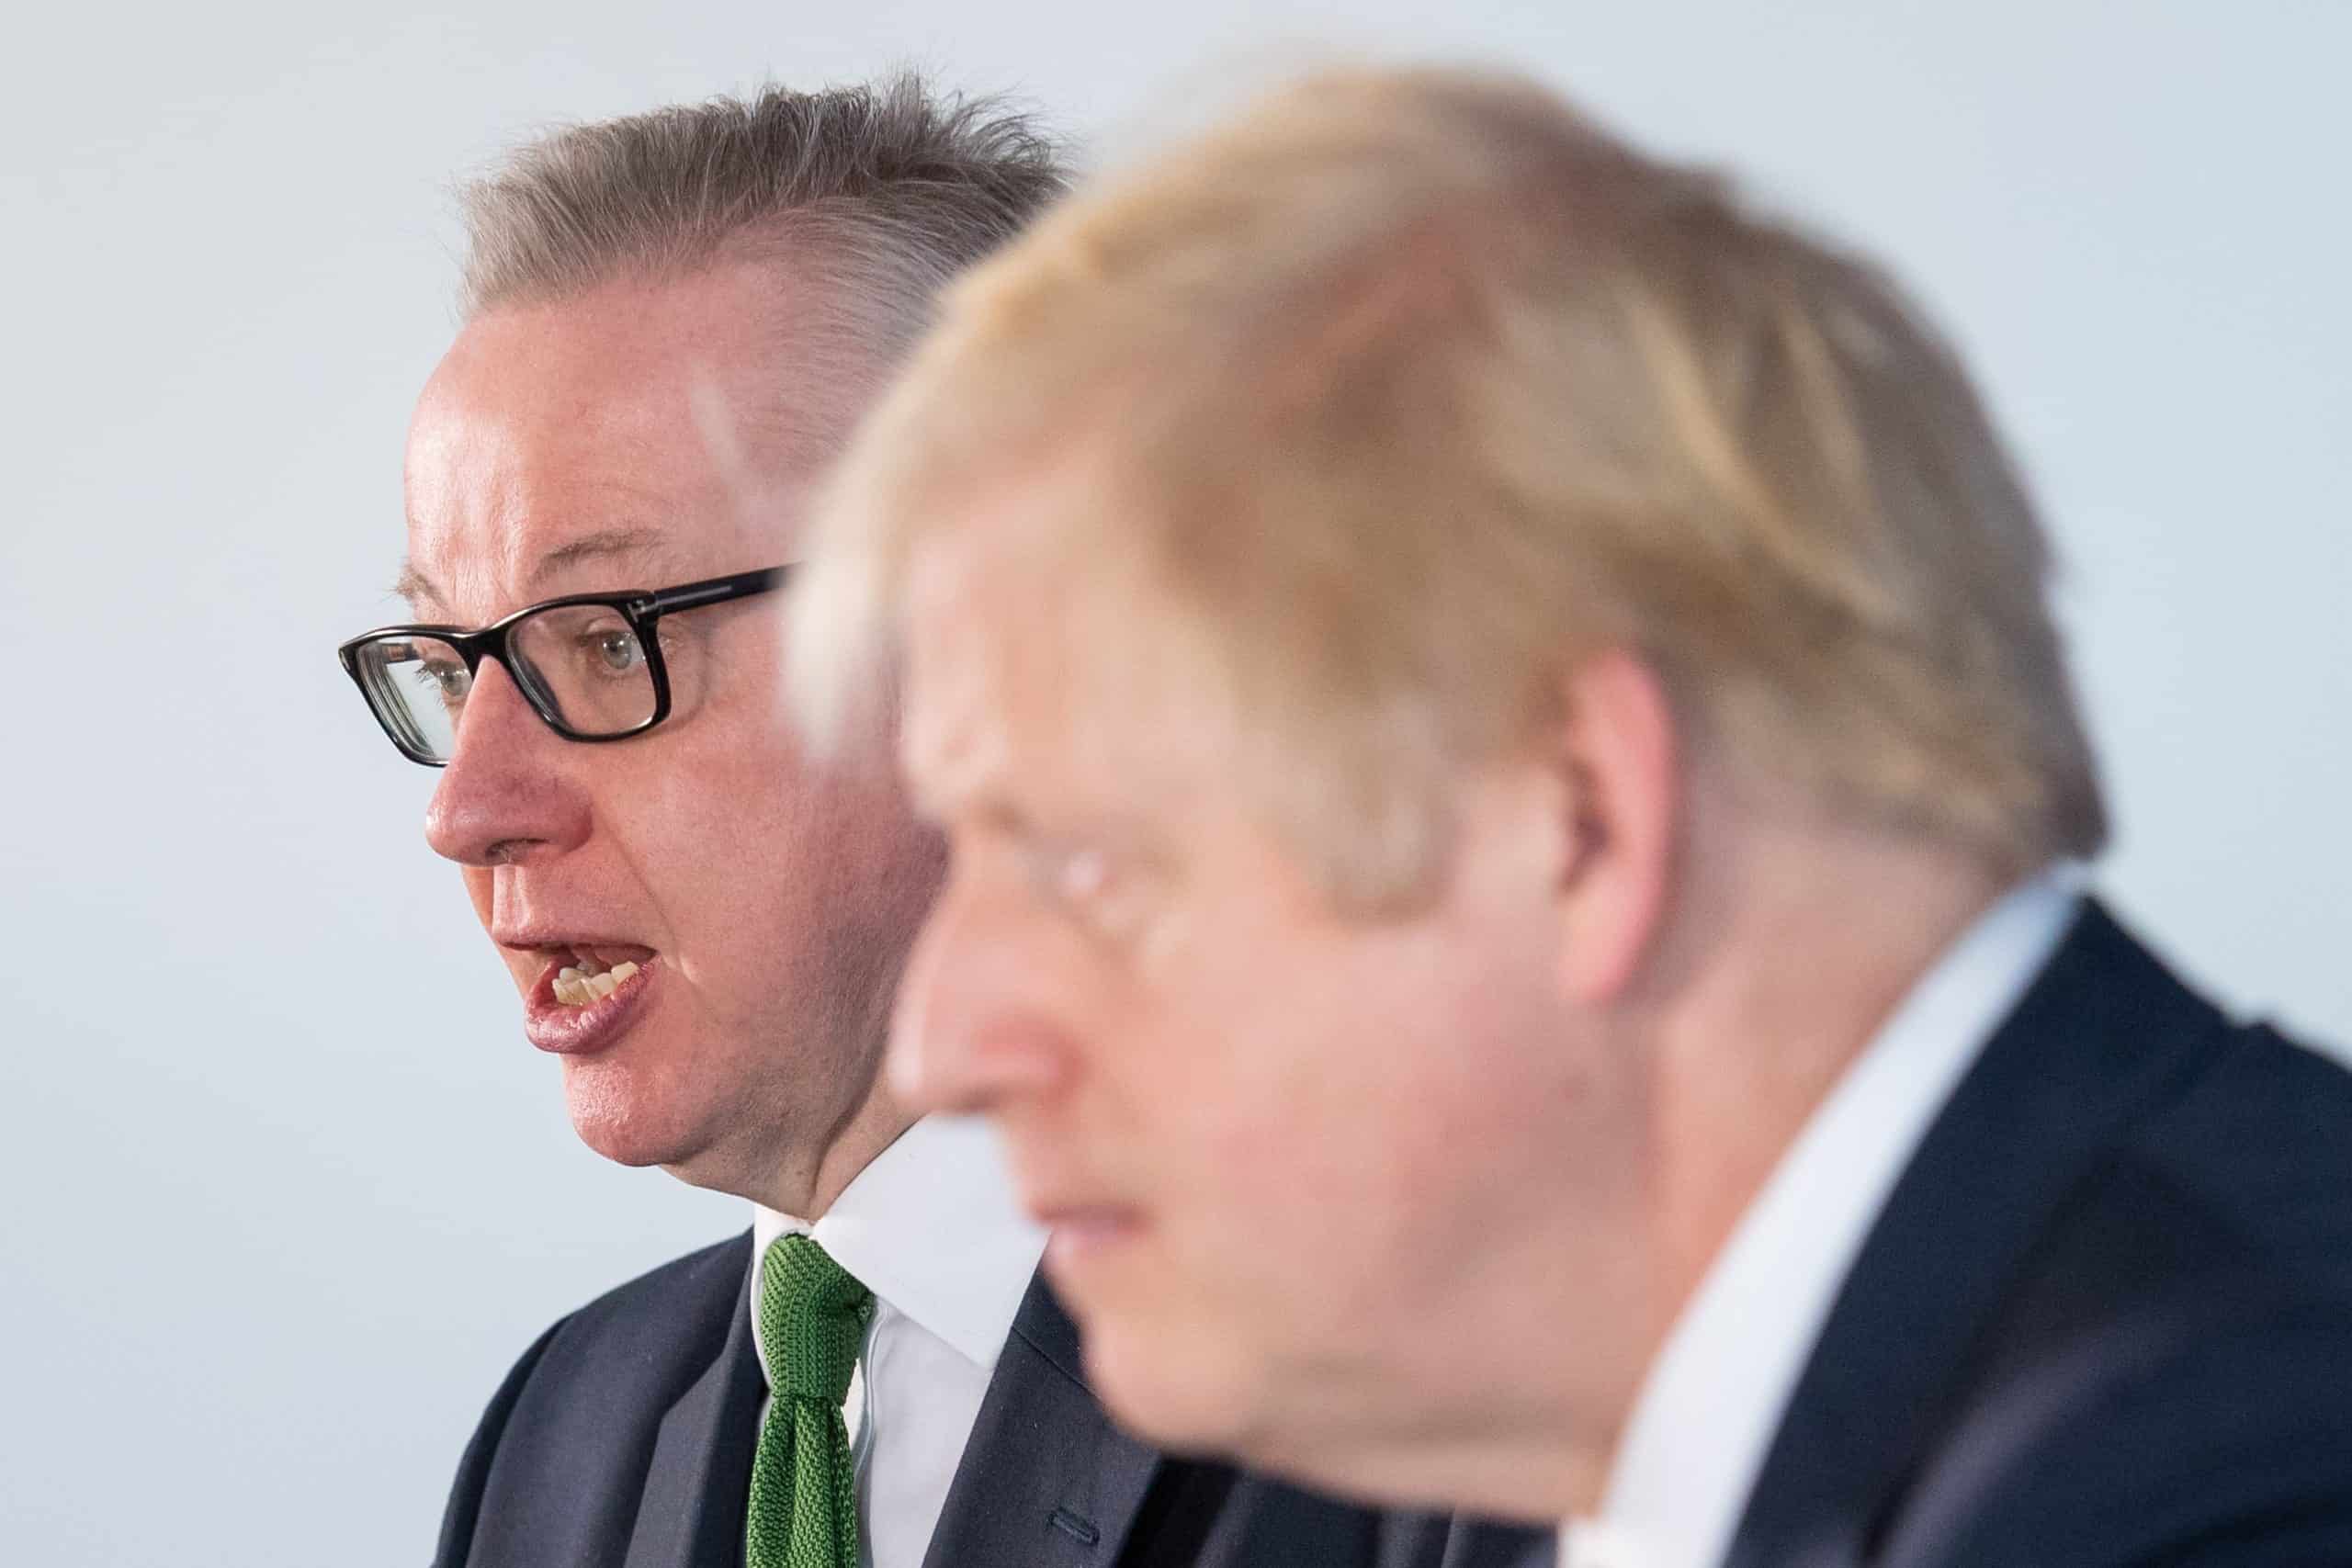 Flashback to when Johnson and Gove promised lower gas bills